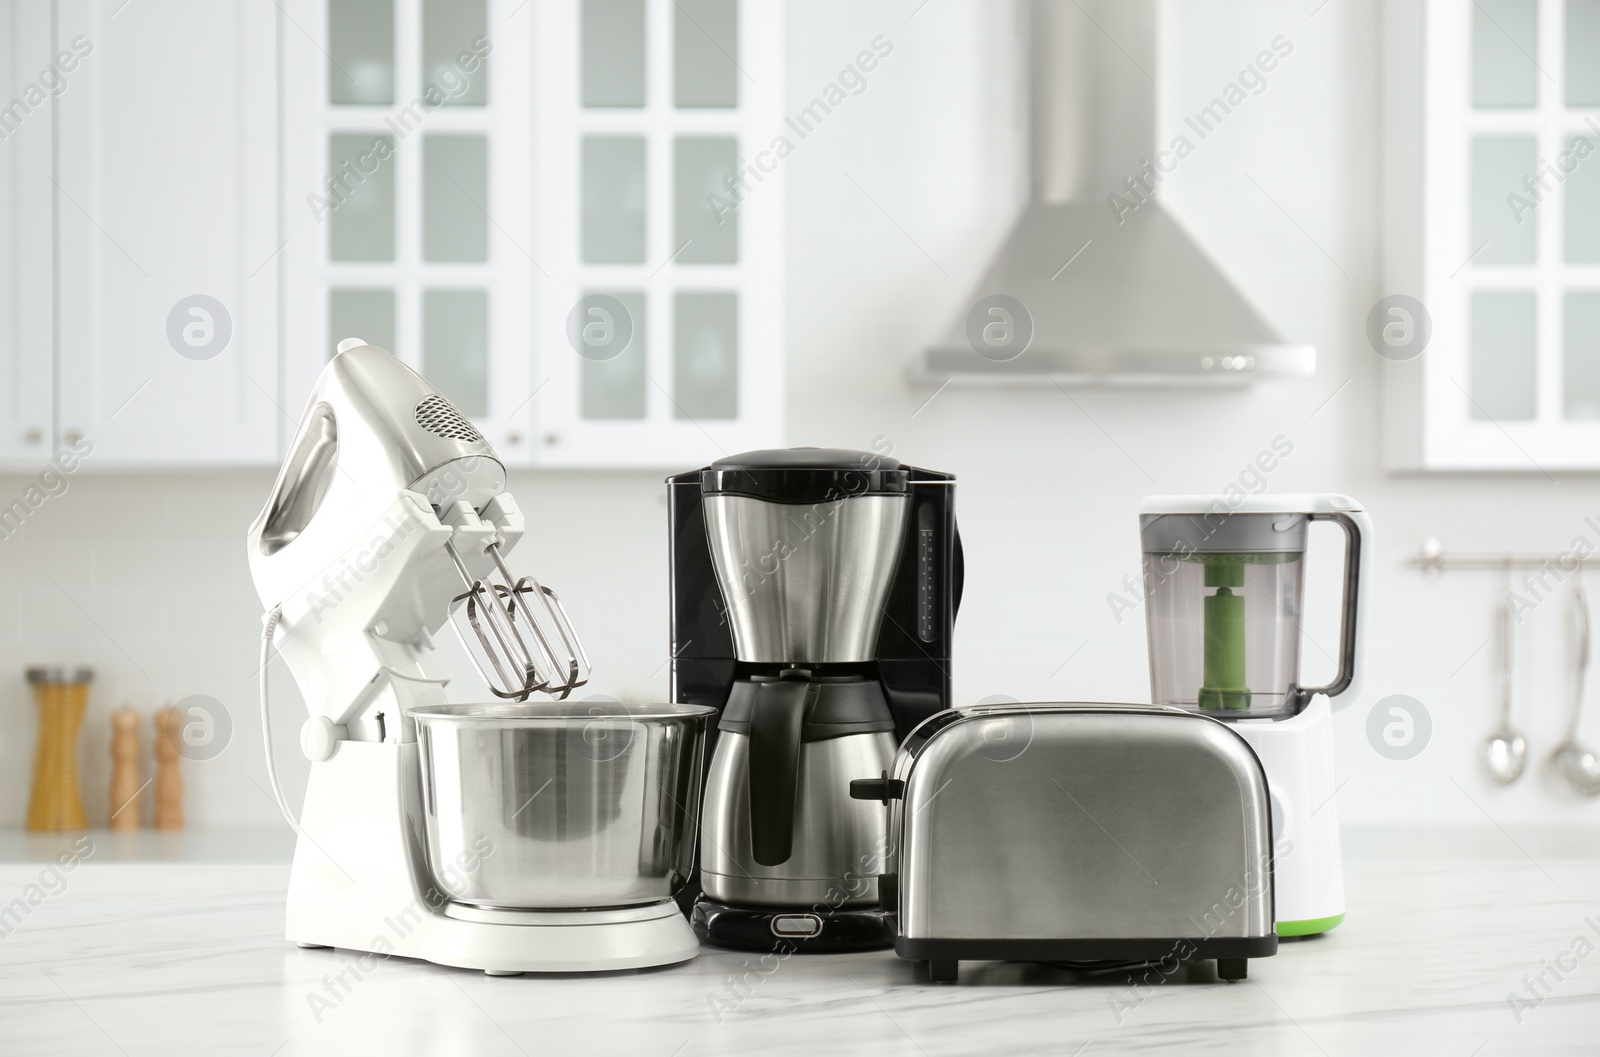 Photo of Modern toaster and other home appliances on white marble table in kitchen